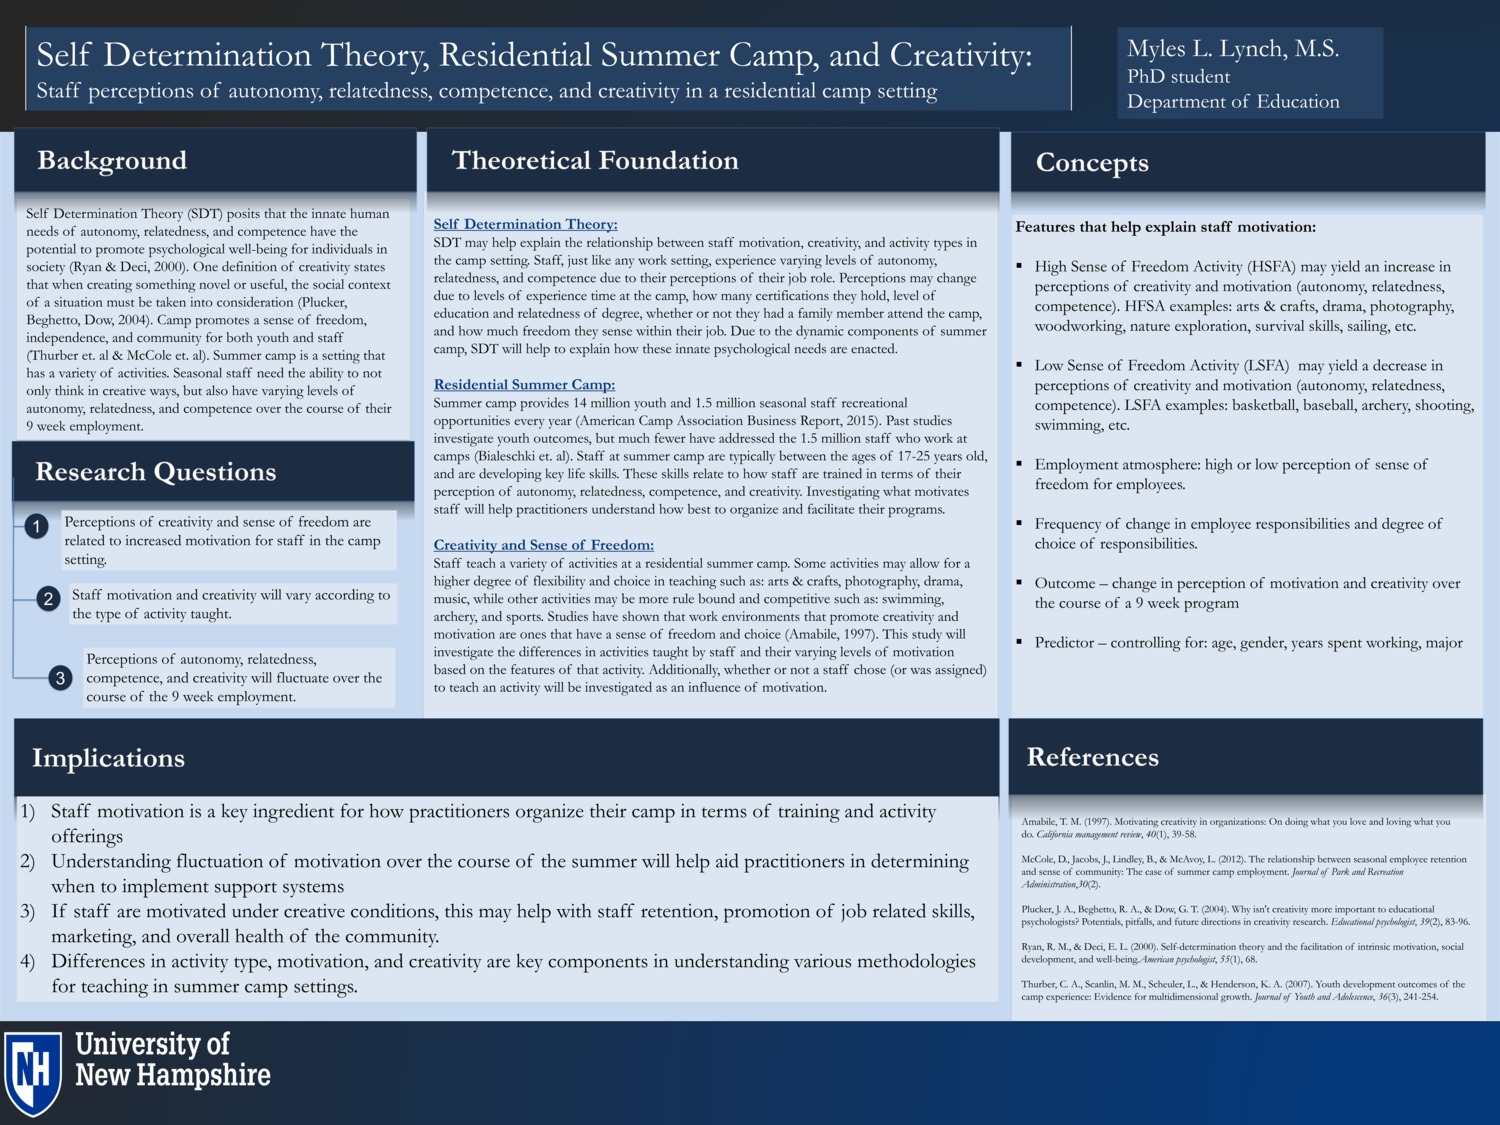 Self Determination Theory, Residential Summer Camp, And Creativity: Staff Perceptions Of Autonomy, Relatedness, Competence, And Creativity In A Residential Camp Setting by myleslynch